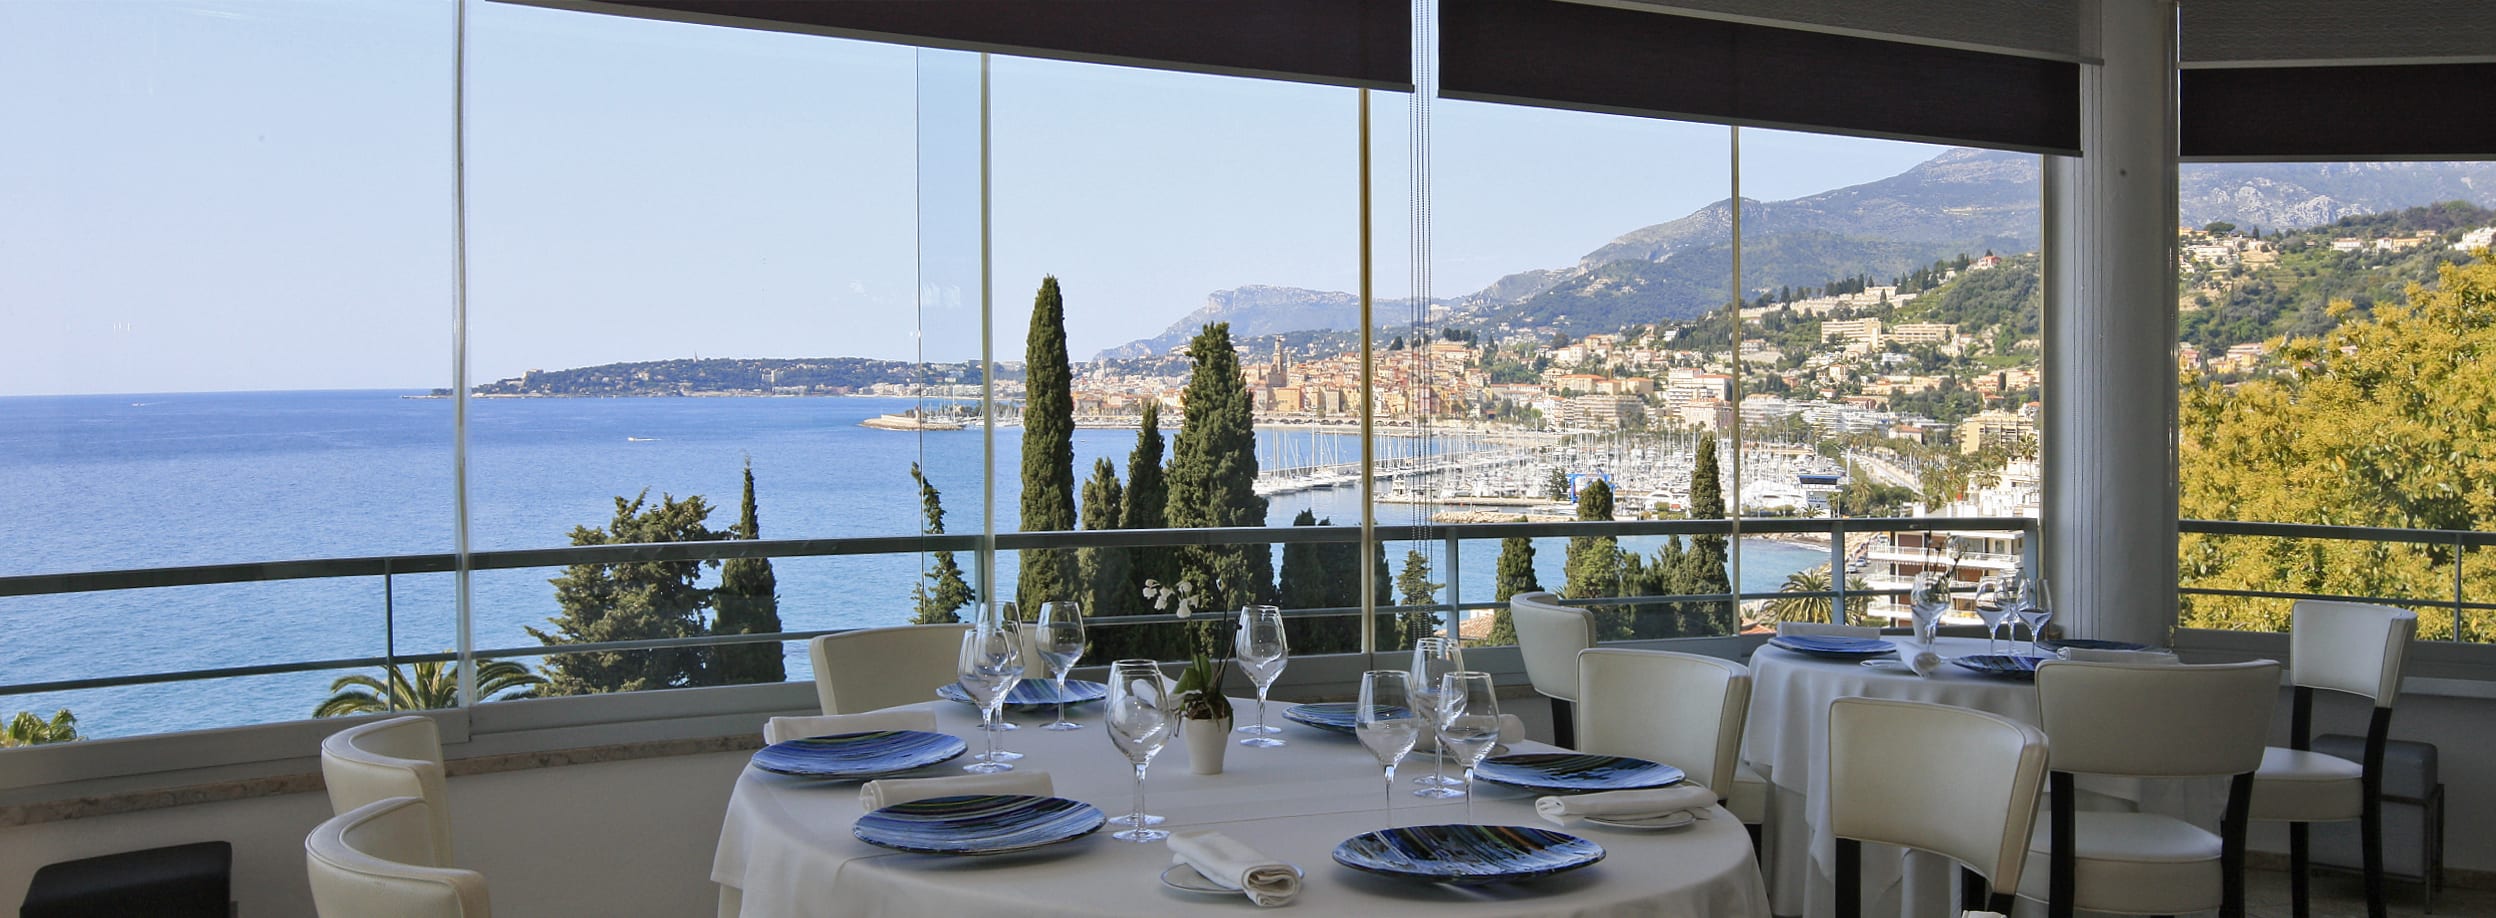 salle principale ...the rochini´s referencebook with Mauro Colagreco, the 4th Worlds Best Restaurant by San Pellegrino, 2 Star Michelin Chef , Relais Chateaux from Mirazur/Menton..